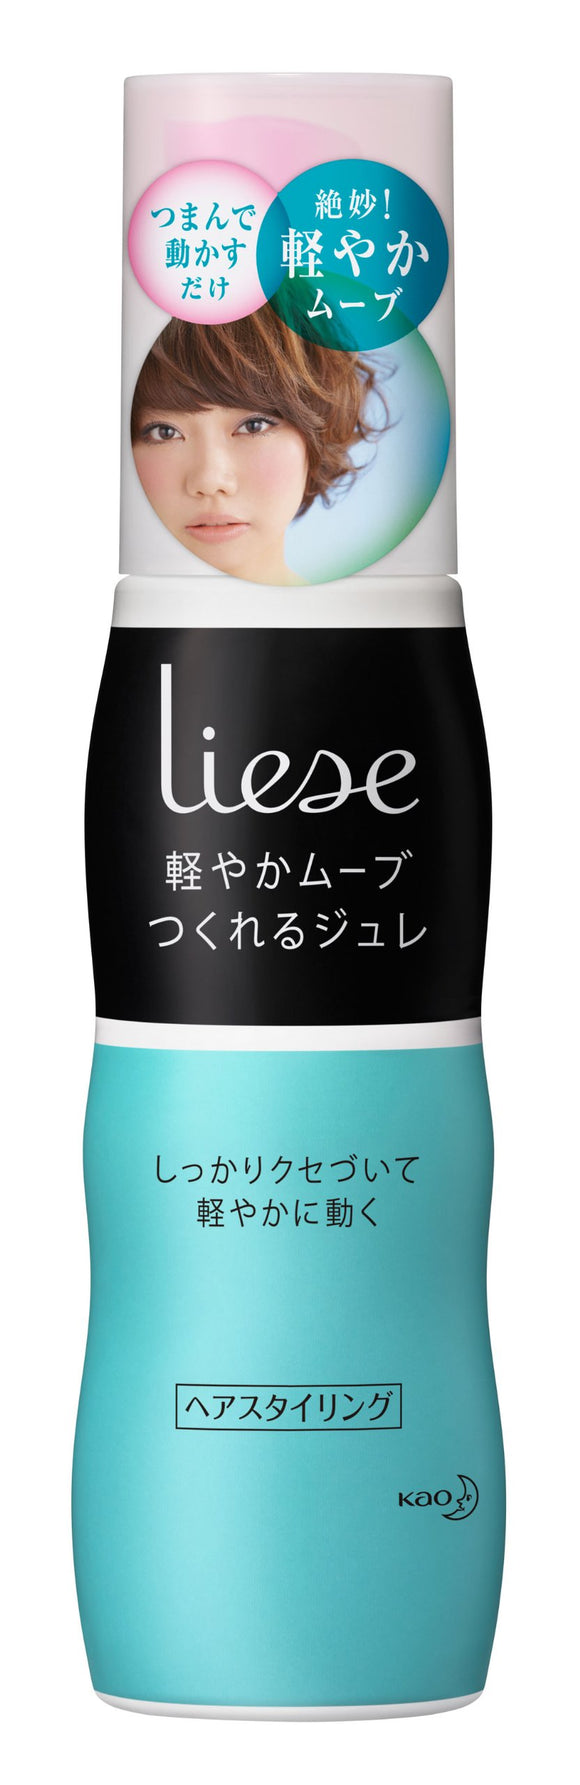 Liese jelly that can make light moves 100ml